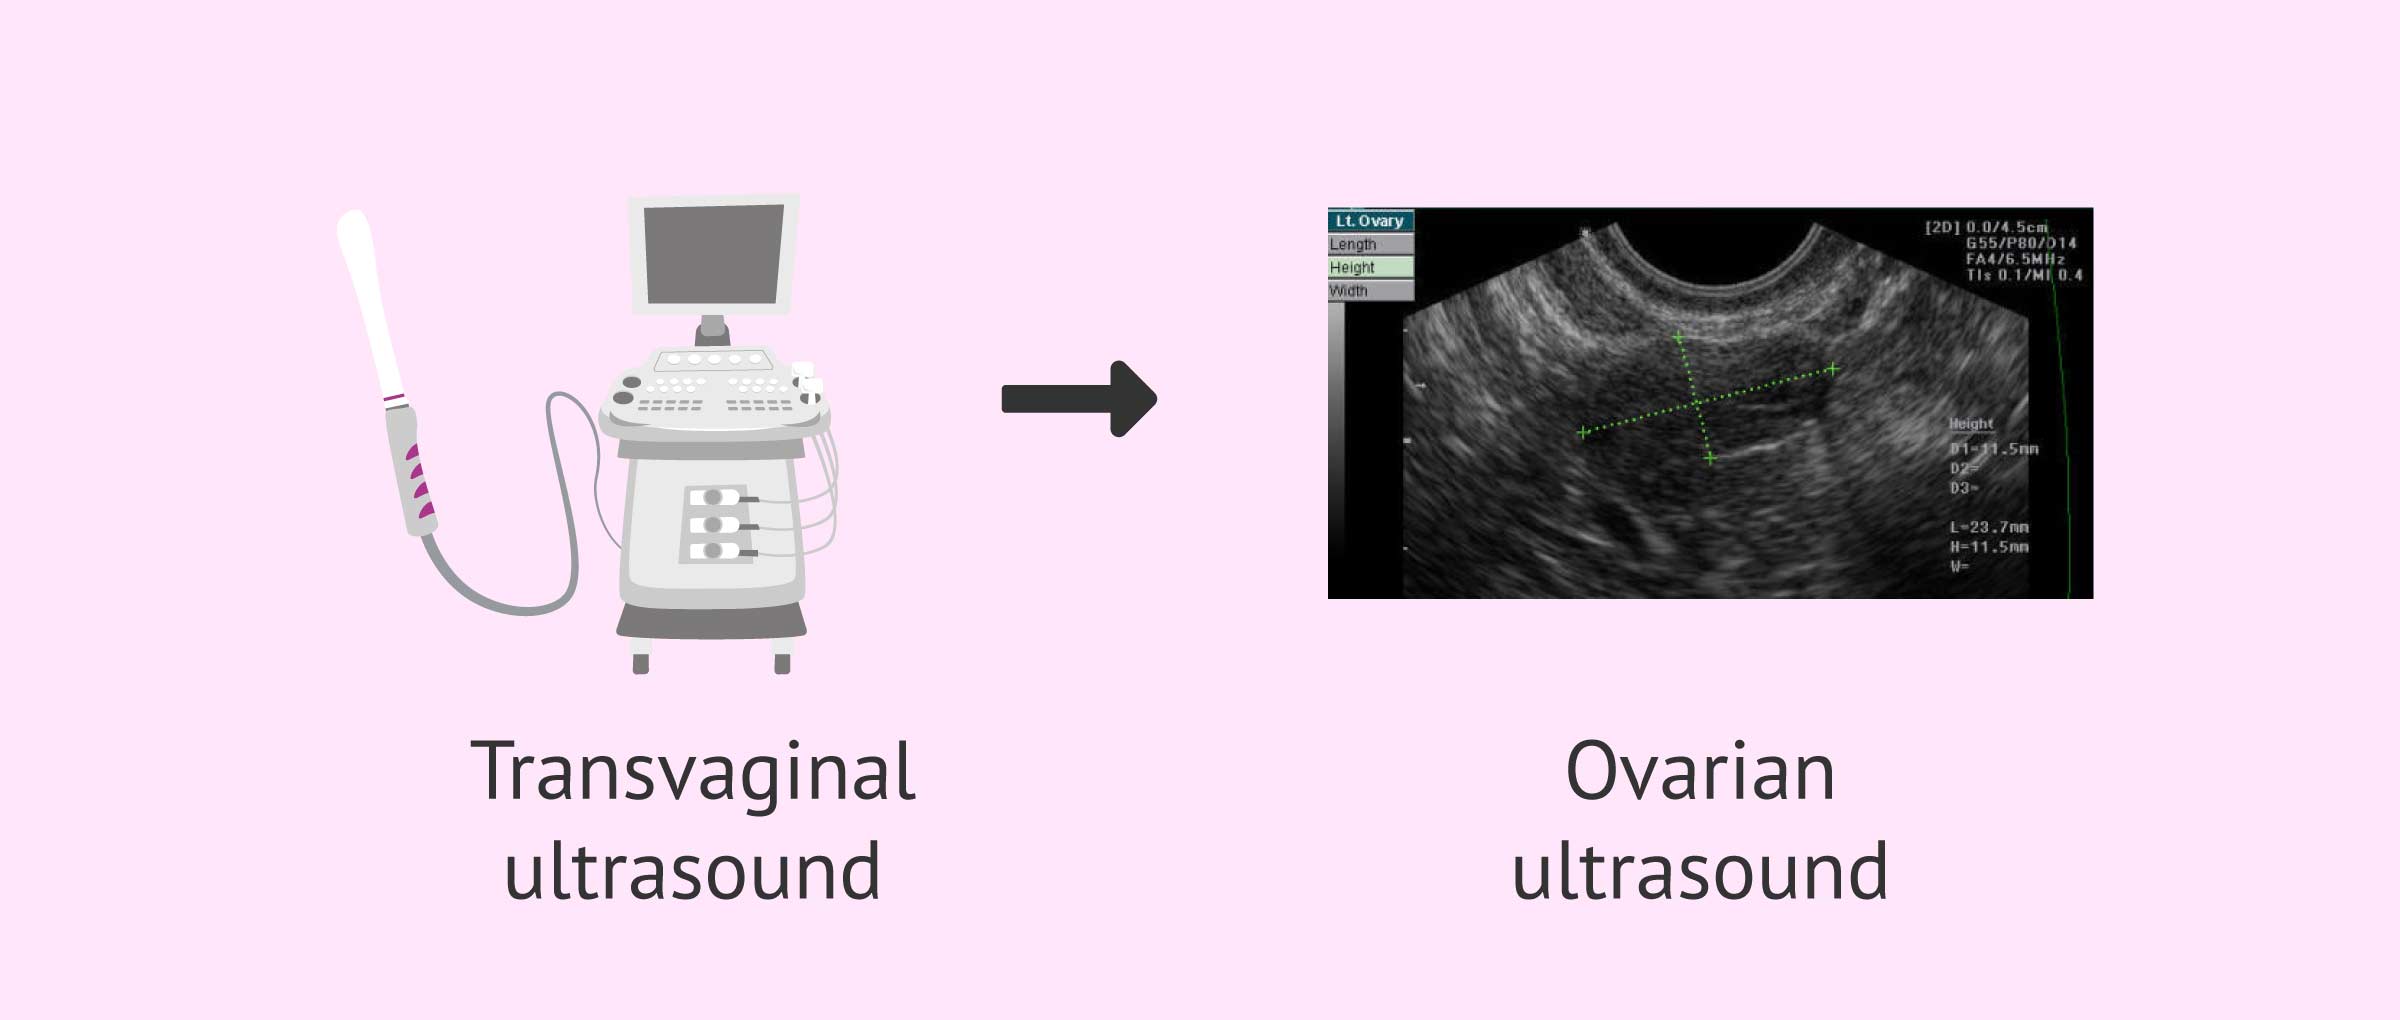 Antral follicle count by transvaginal ultrasound scanning